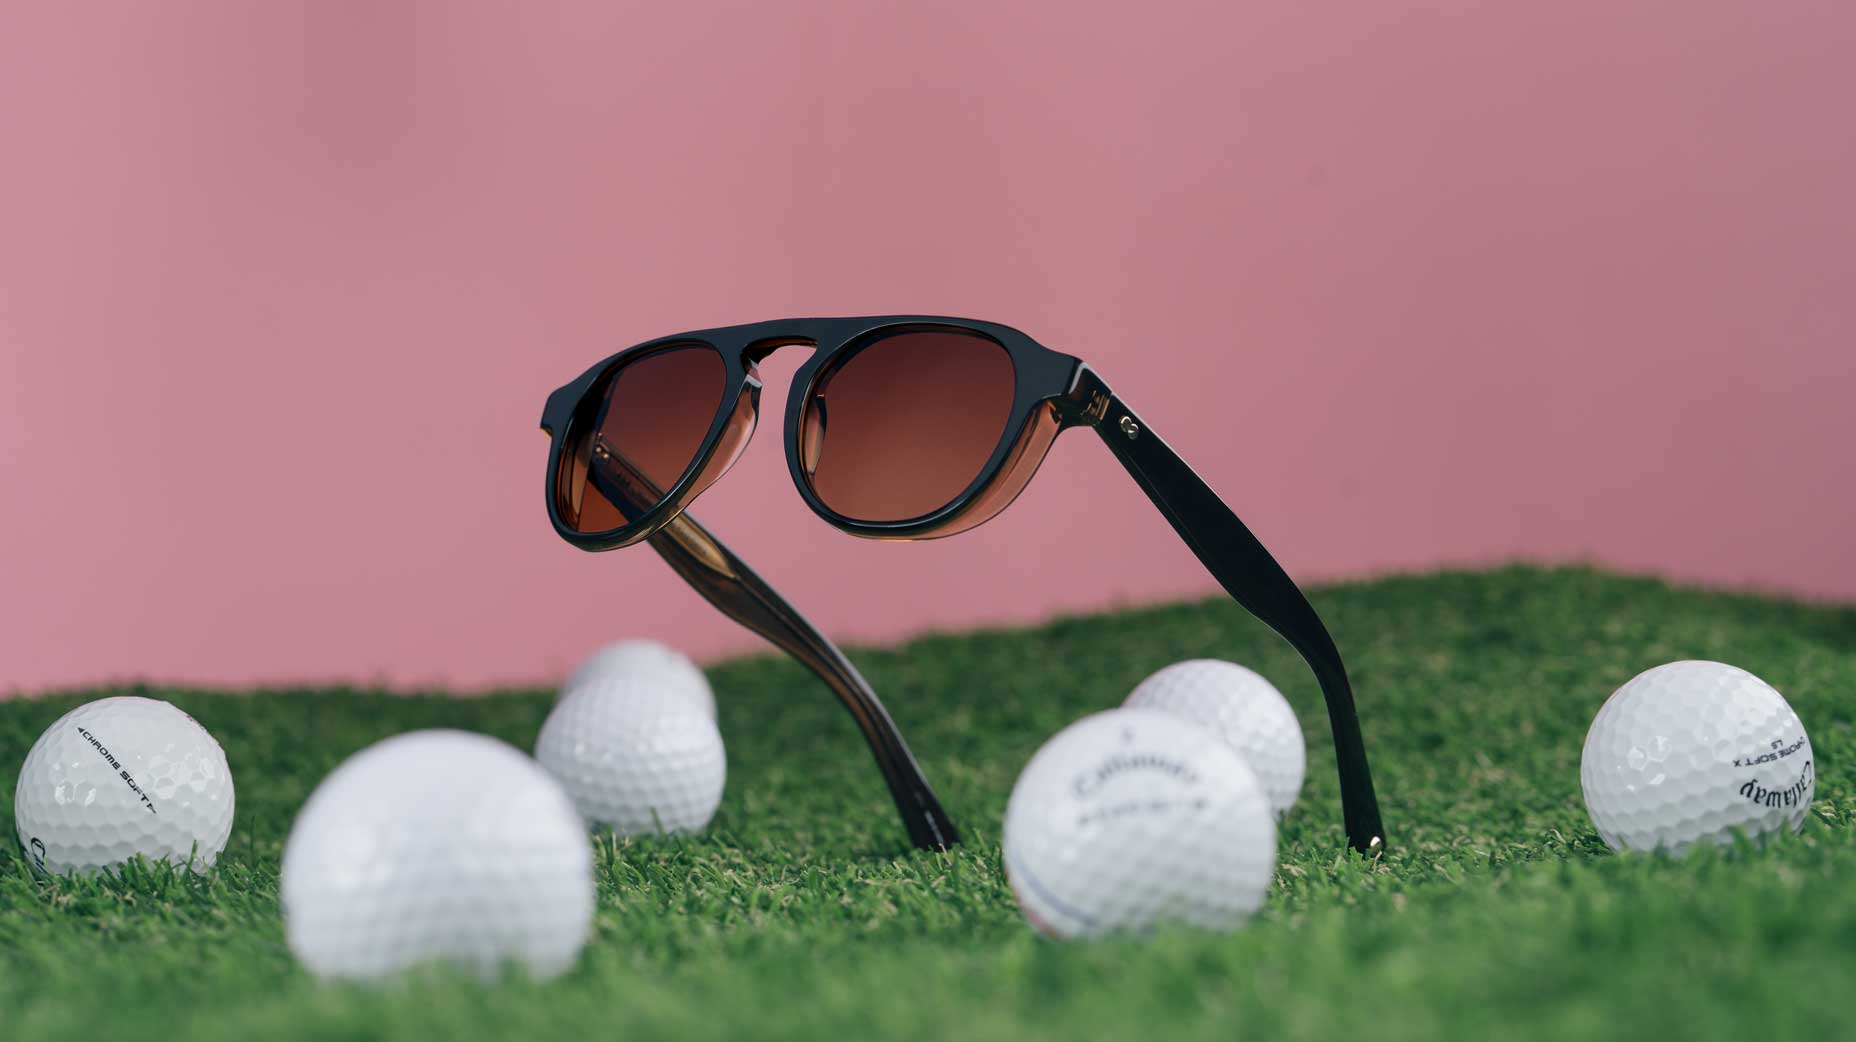 GOLF Spring/Summer 2021 Style Guide: Best accessories for your game